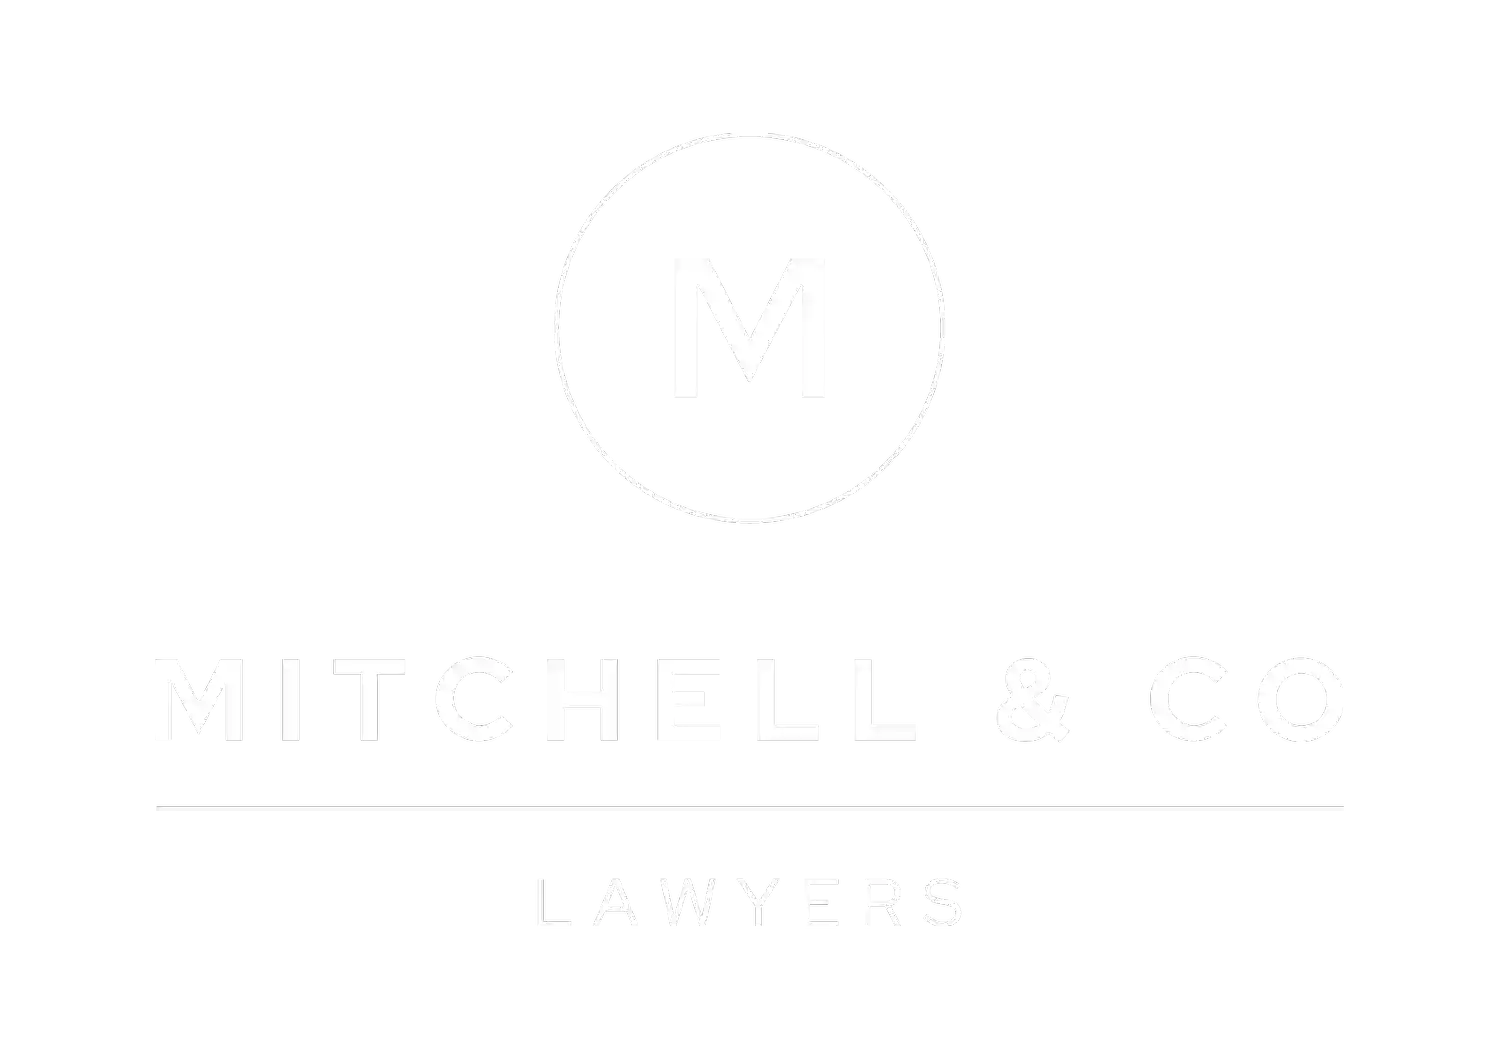 Mitchell & Co. Lawyers